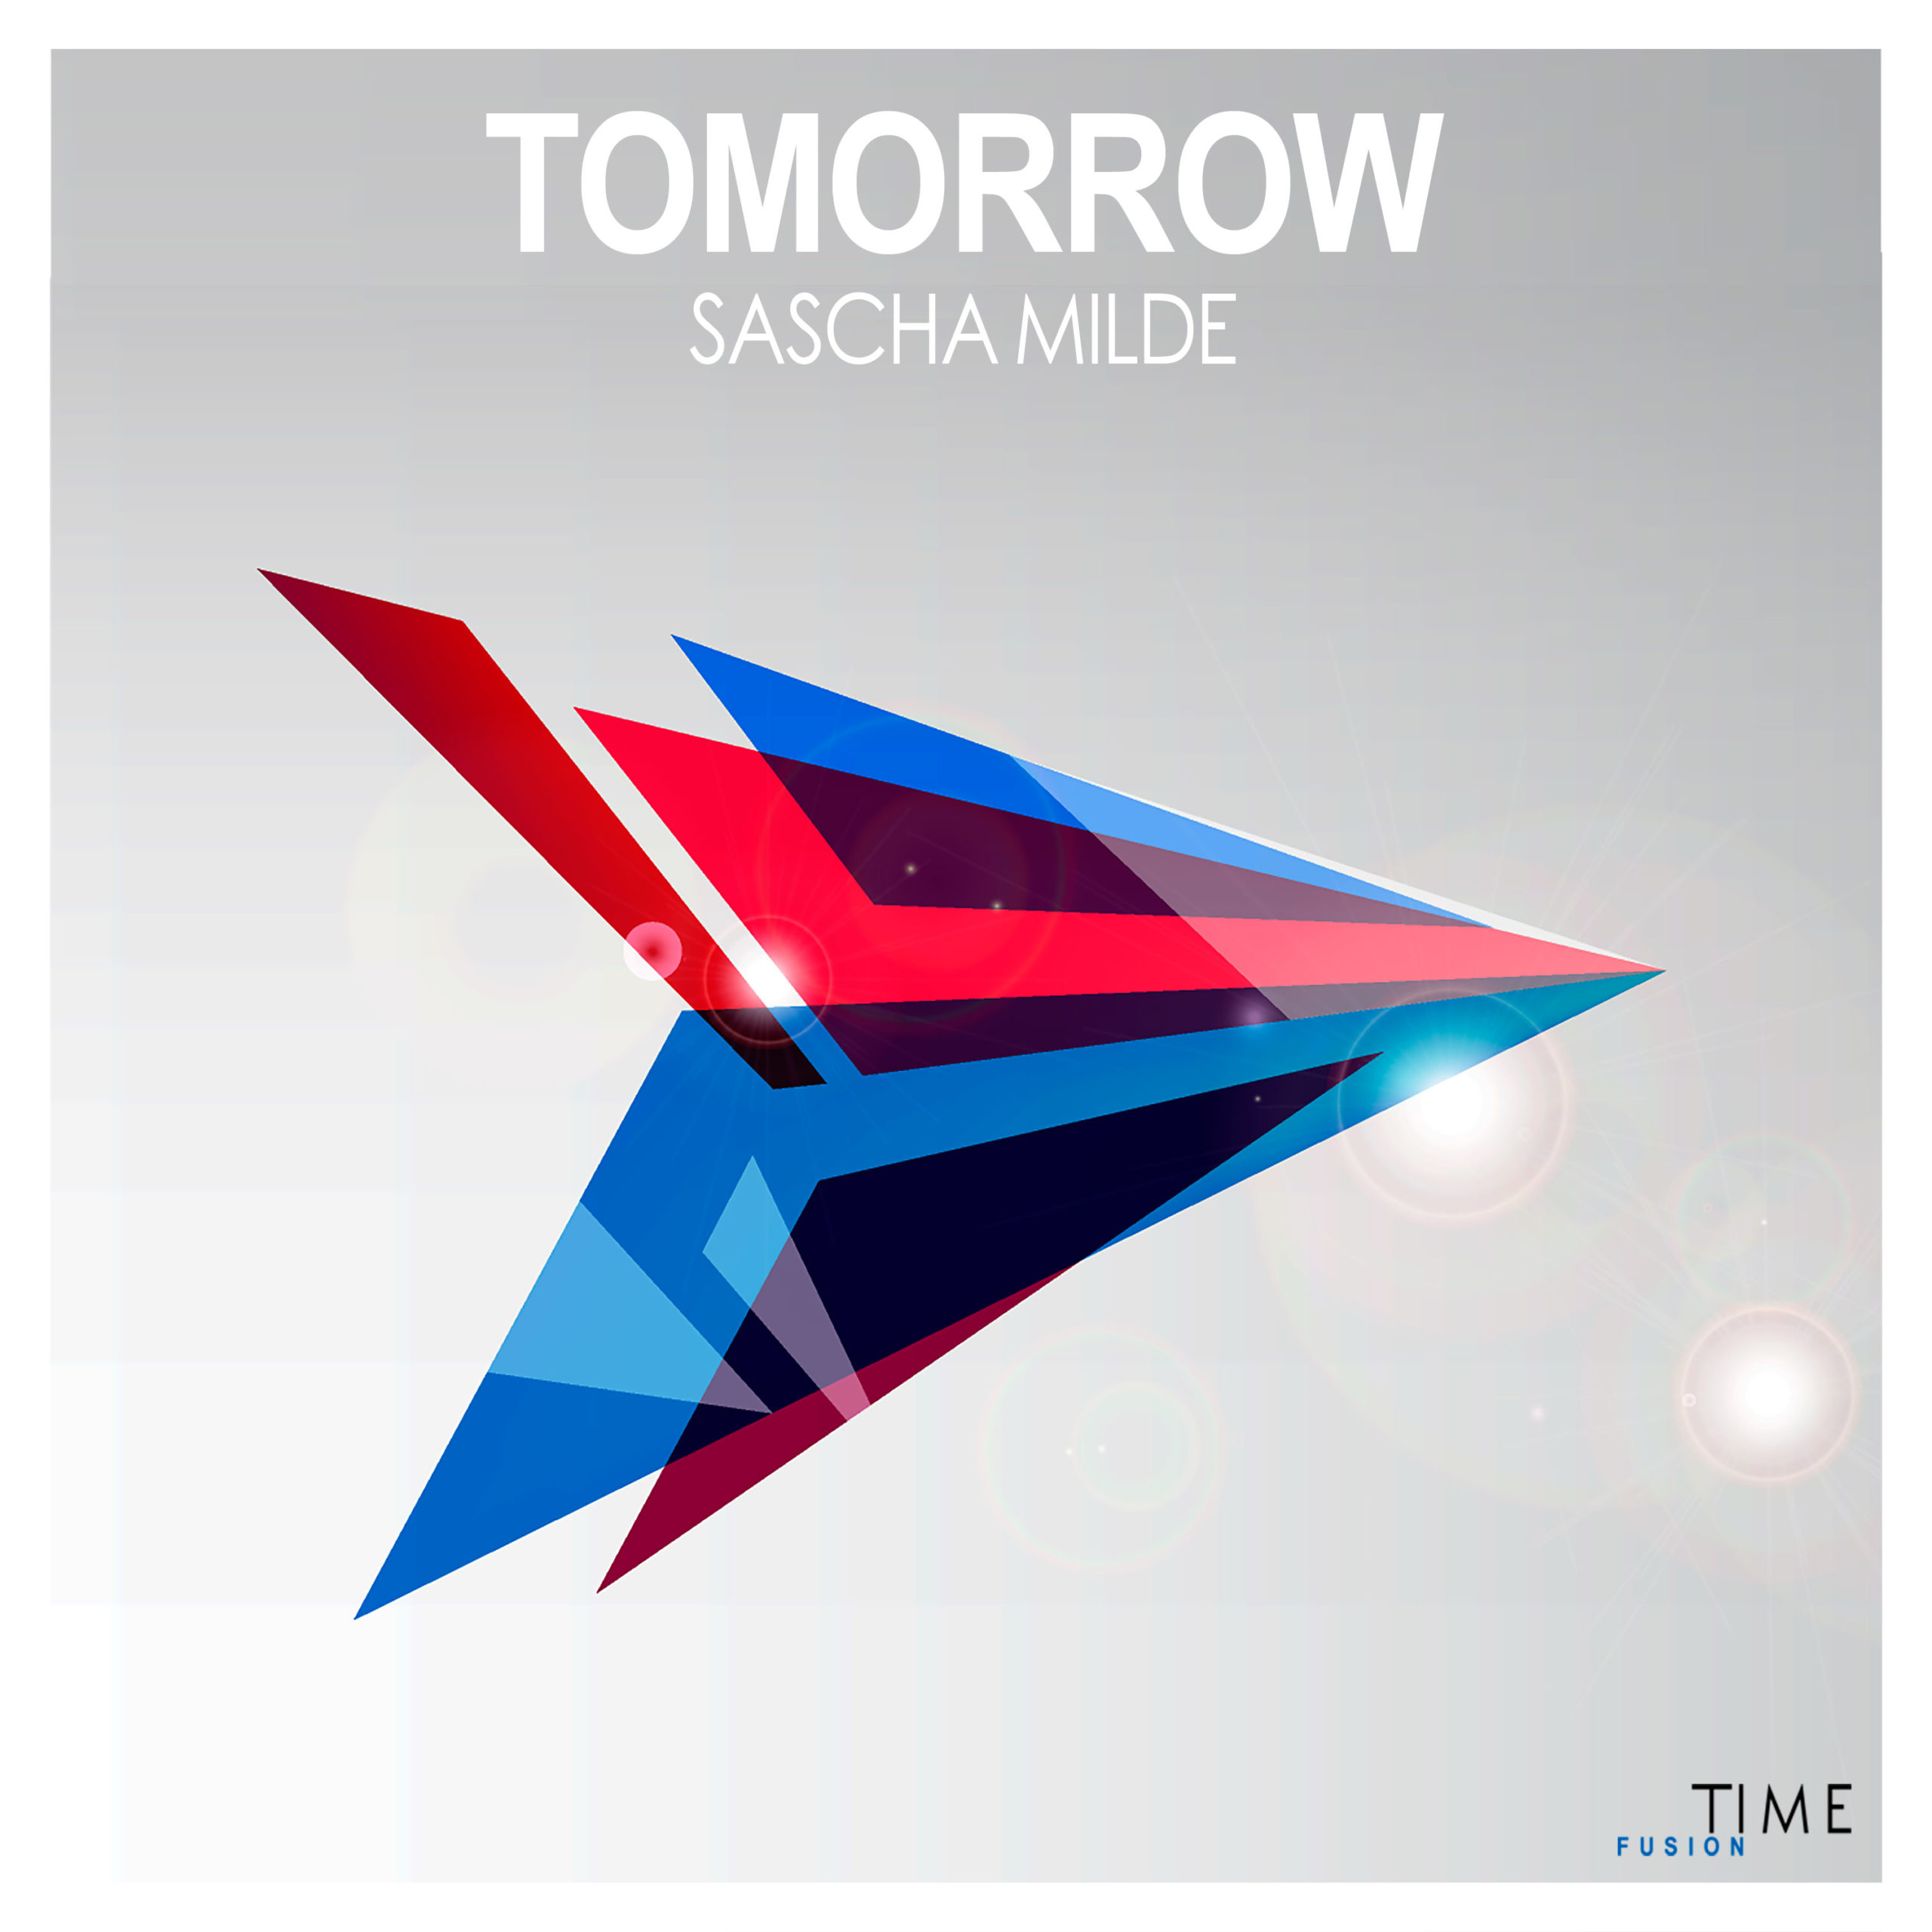 https://www.ultimate-house-records.com/wp-content/uploads/2023/01/tf_Sascha_Milde-Tomorrow_Cover_3000px_web-scaled.jpg